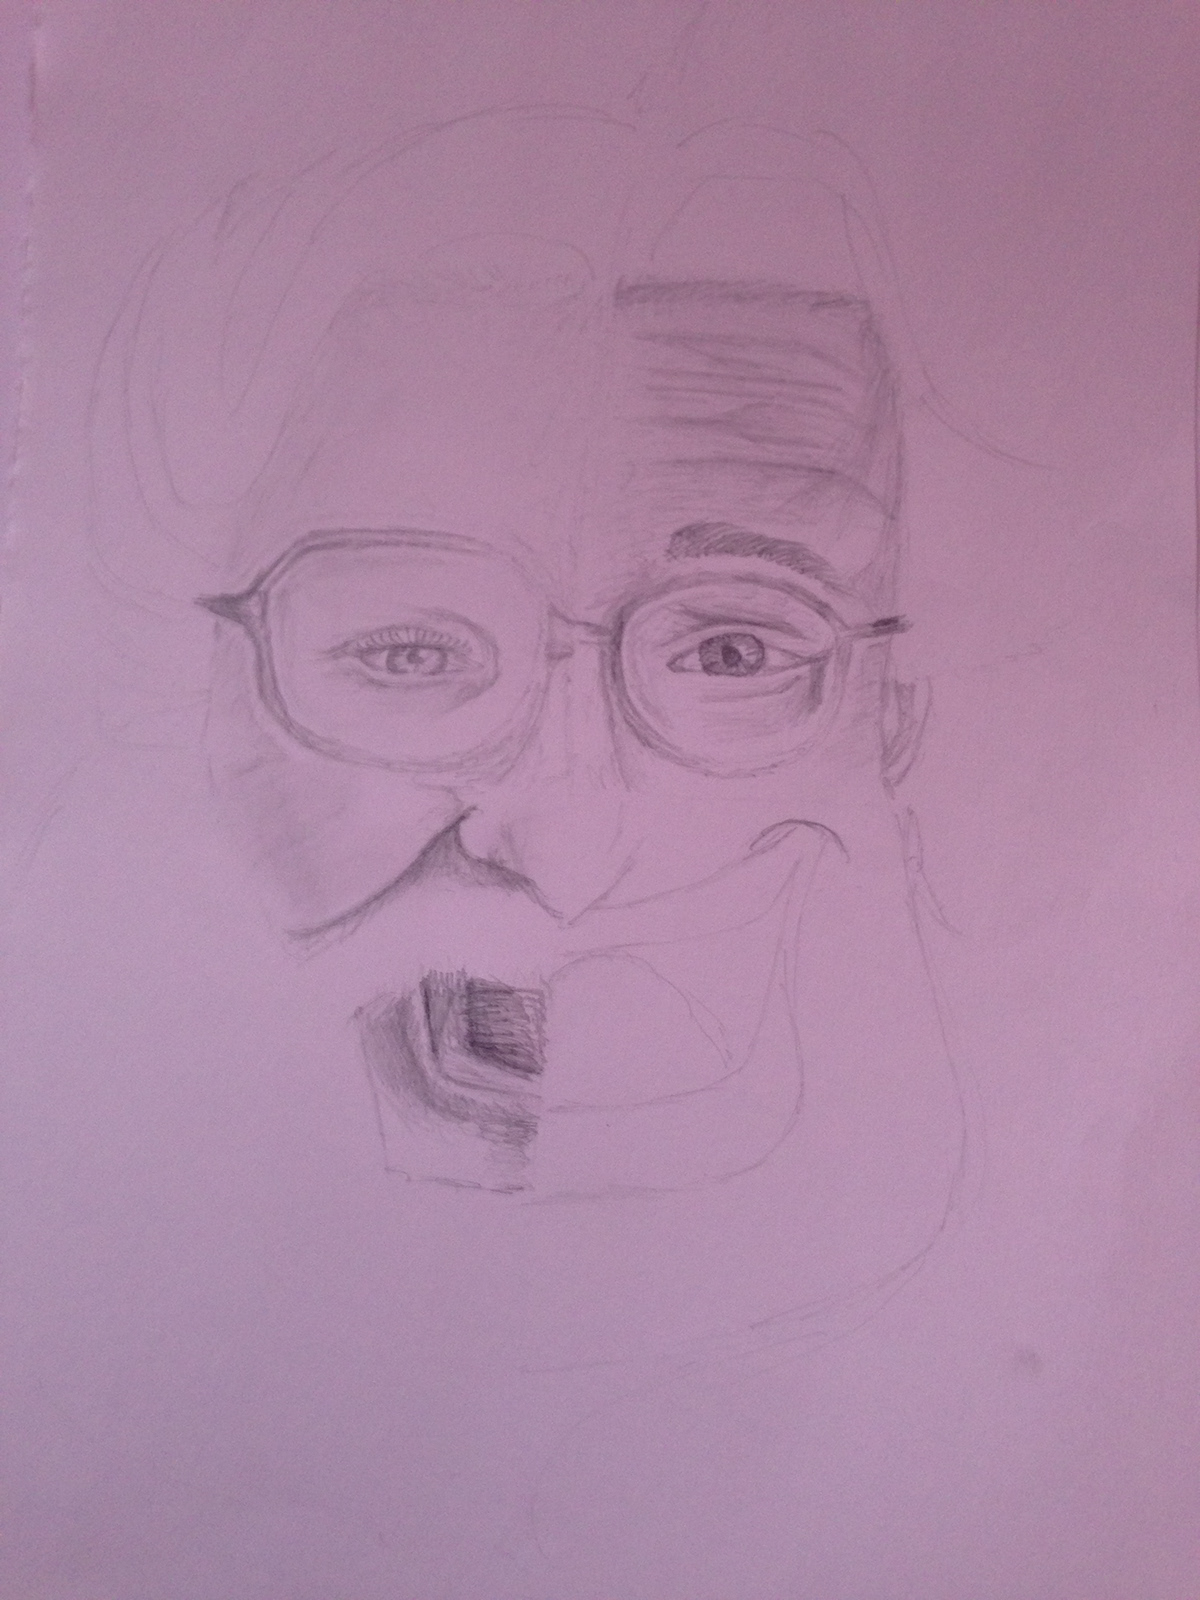 pencil sketch Transcription Robin williams mrs doubtfire tribute aladdin Good Will Hunting paper shading details eyes